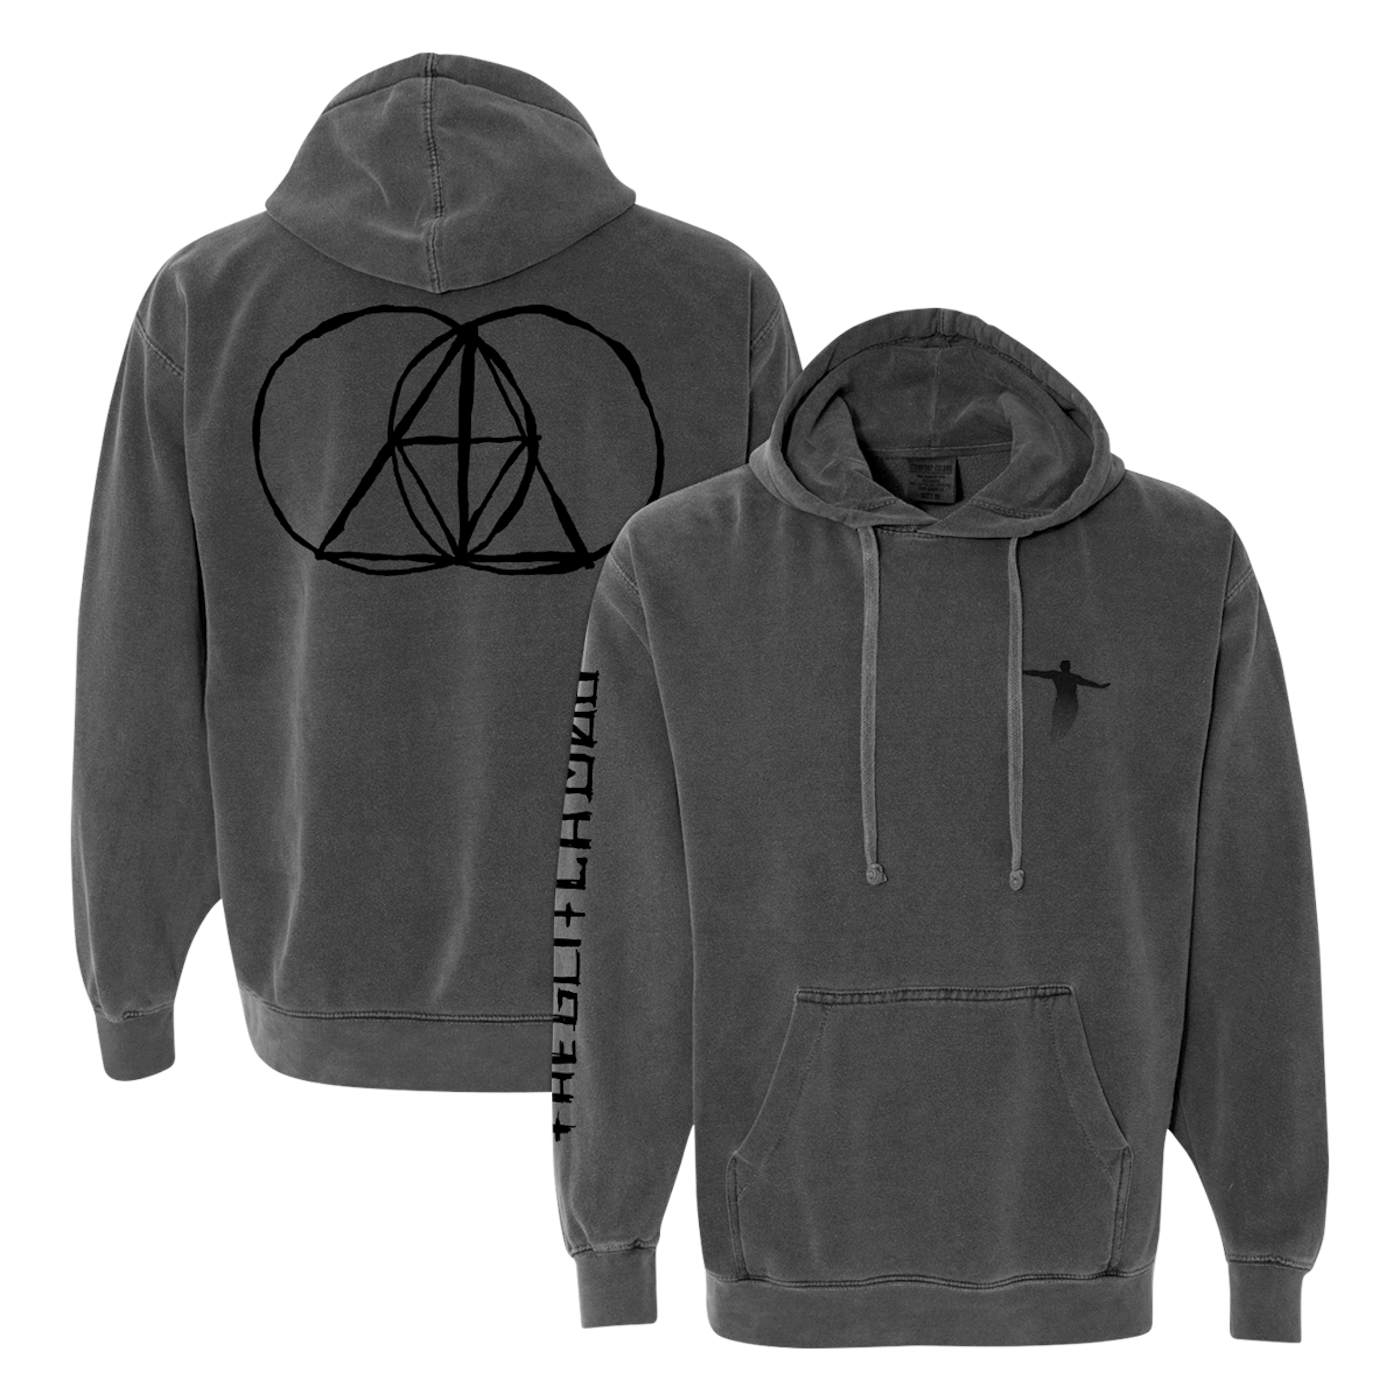 The Glitch Mob SACRED PULLOVER HOODIE